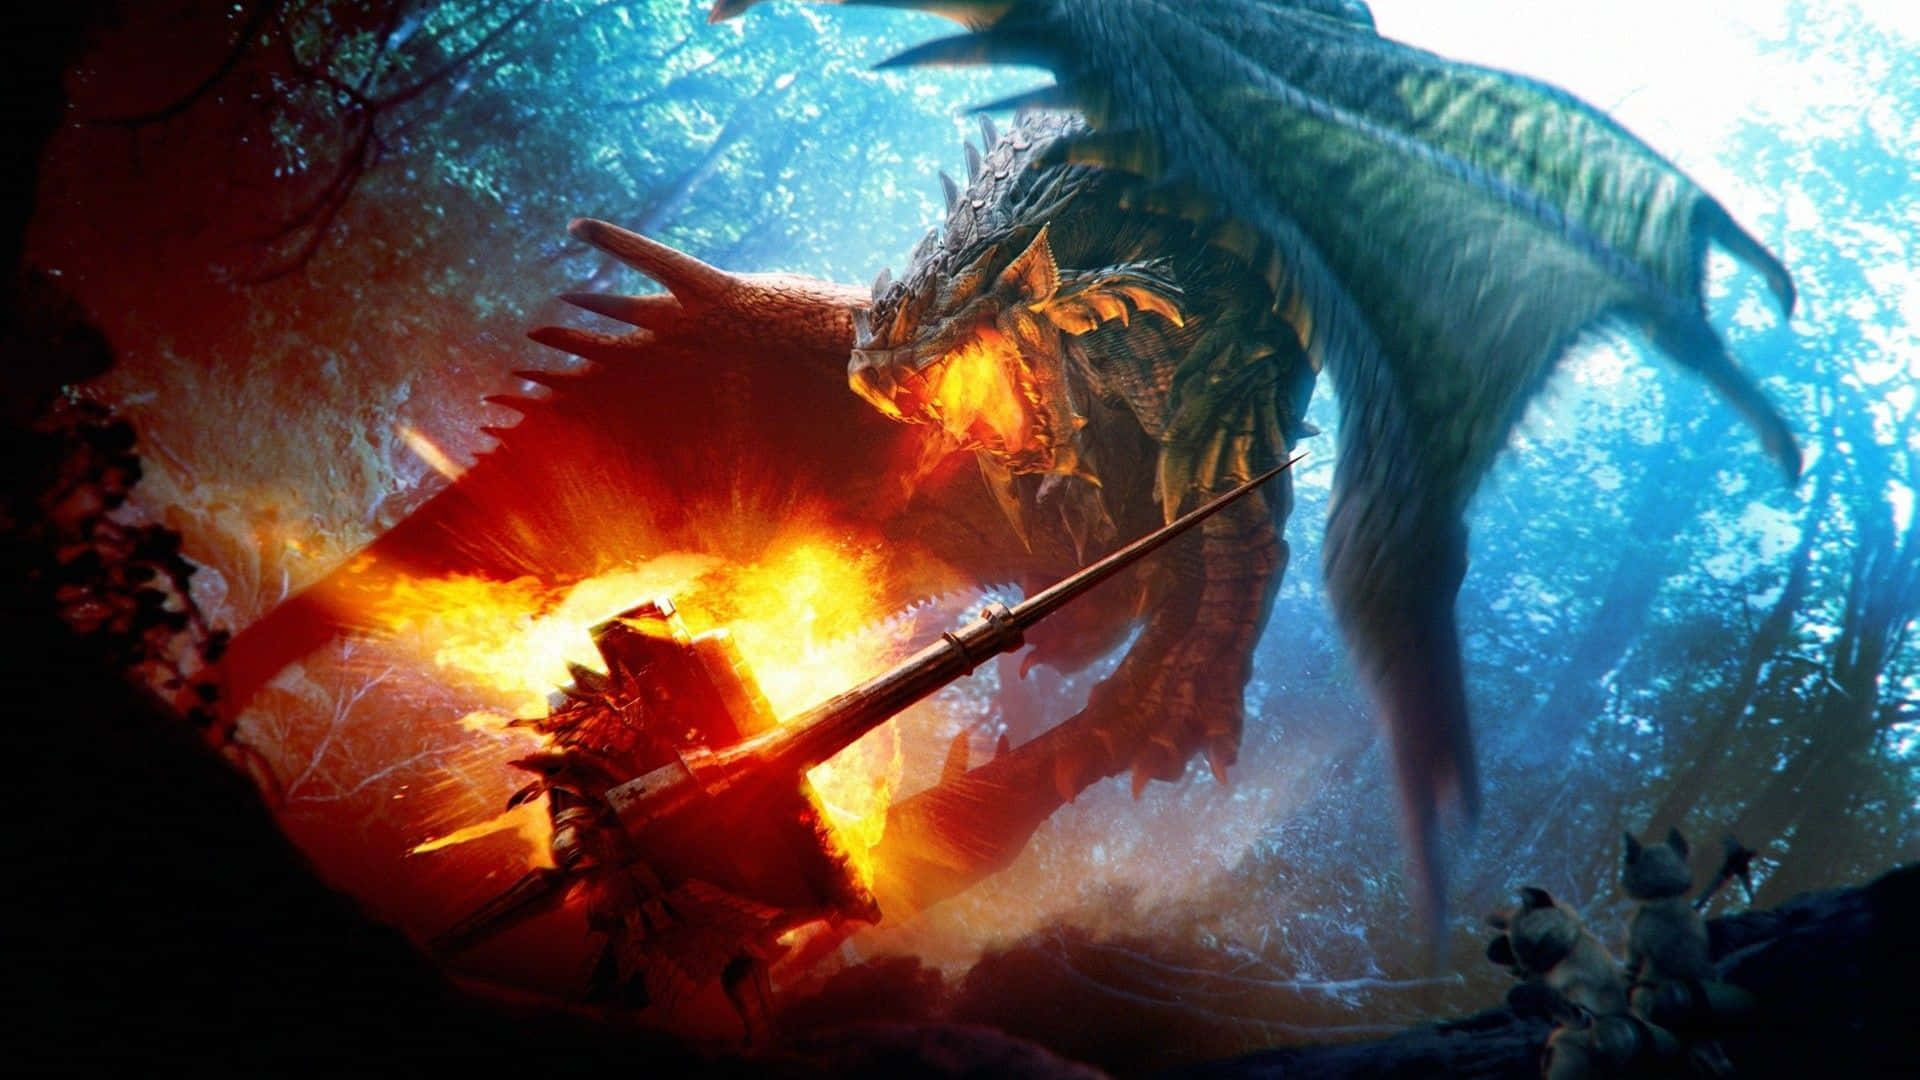 Scary Dragon Blowing Fire Wallpaper